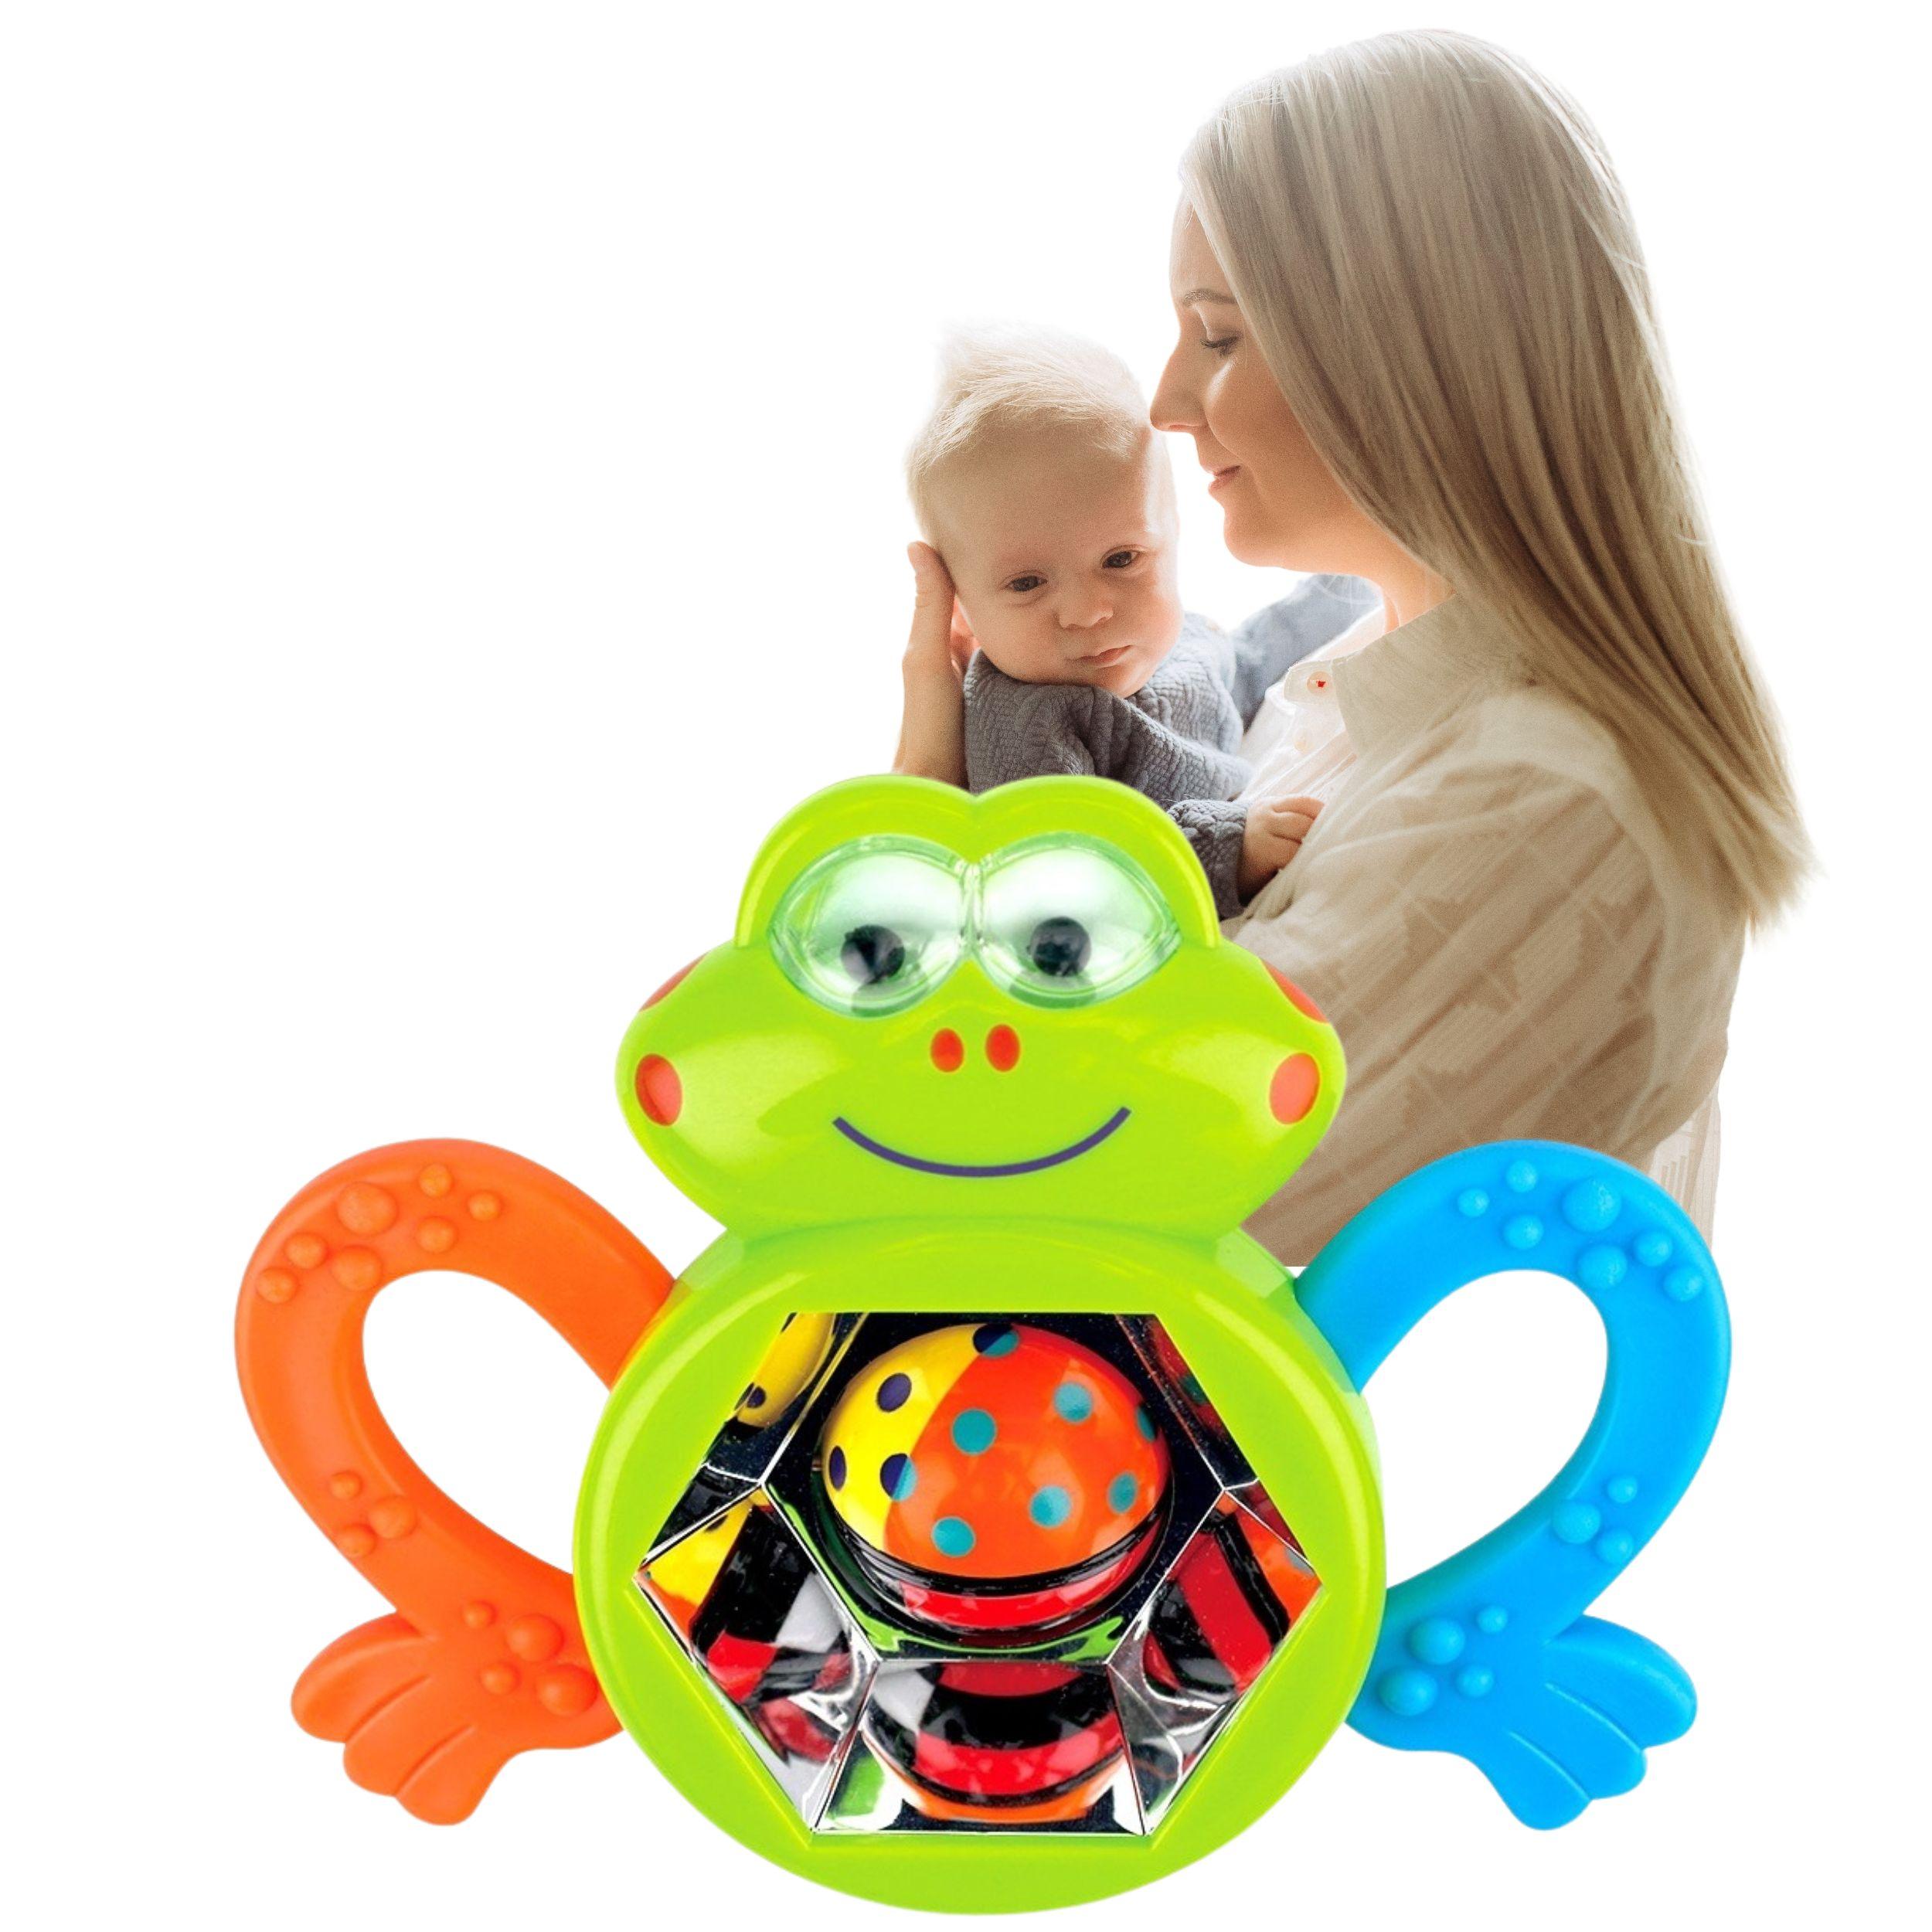 Educational toy / Teether - Frog